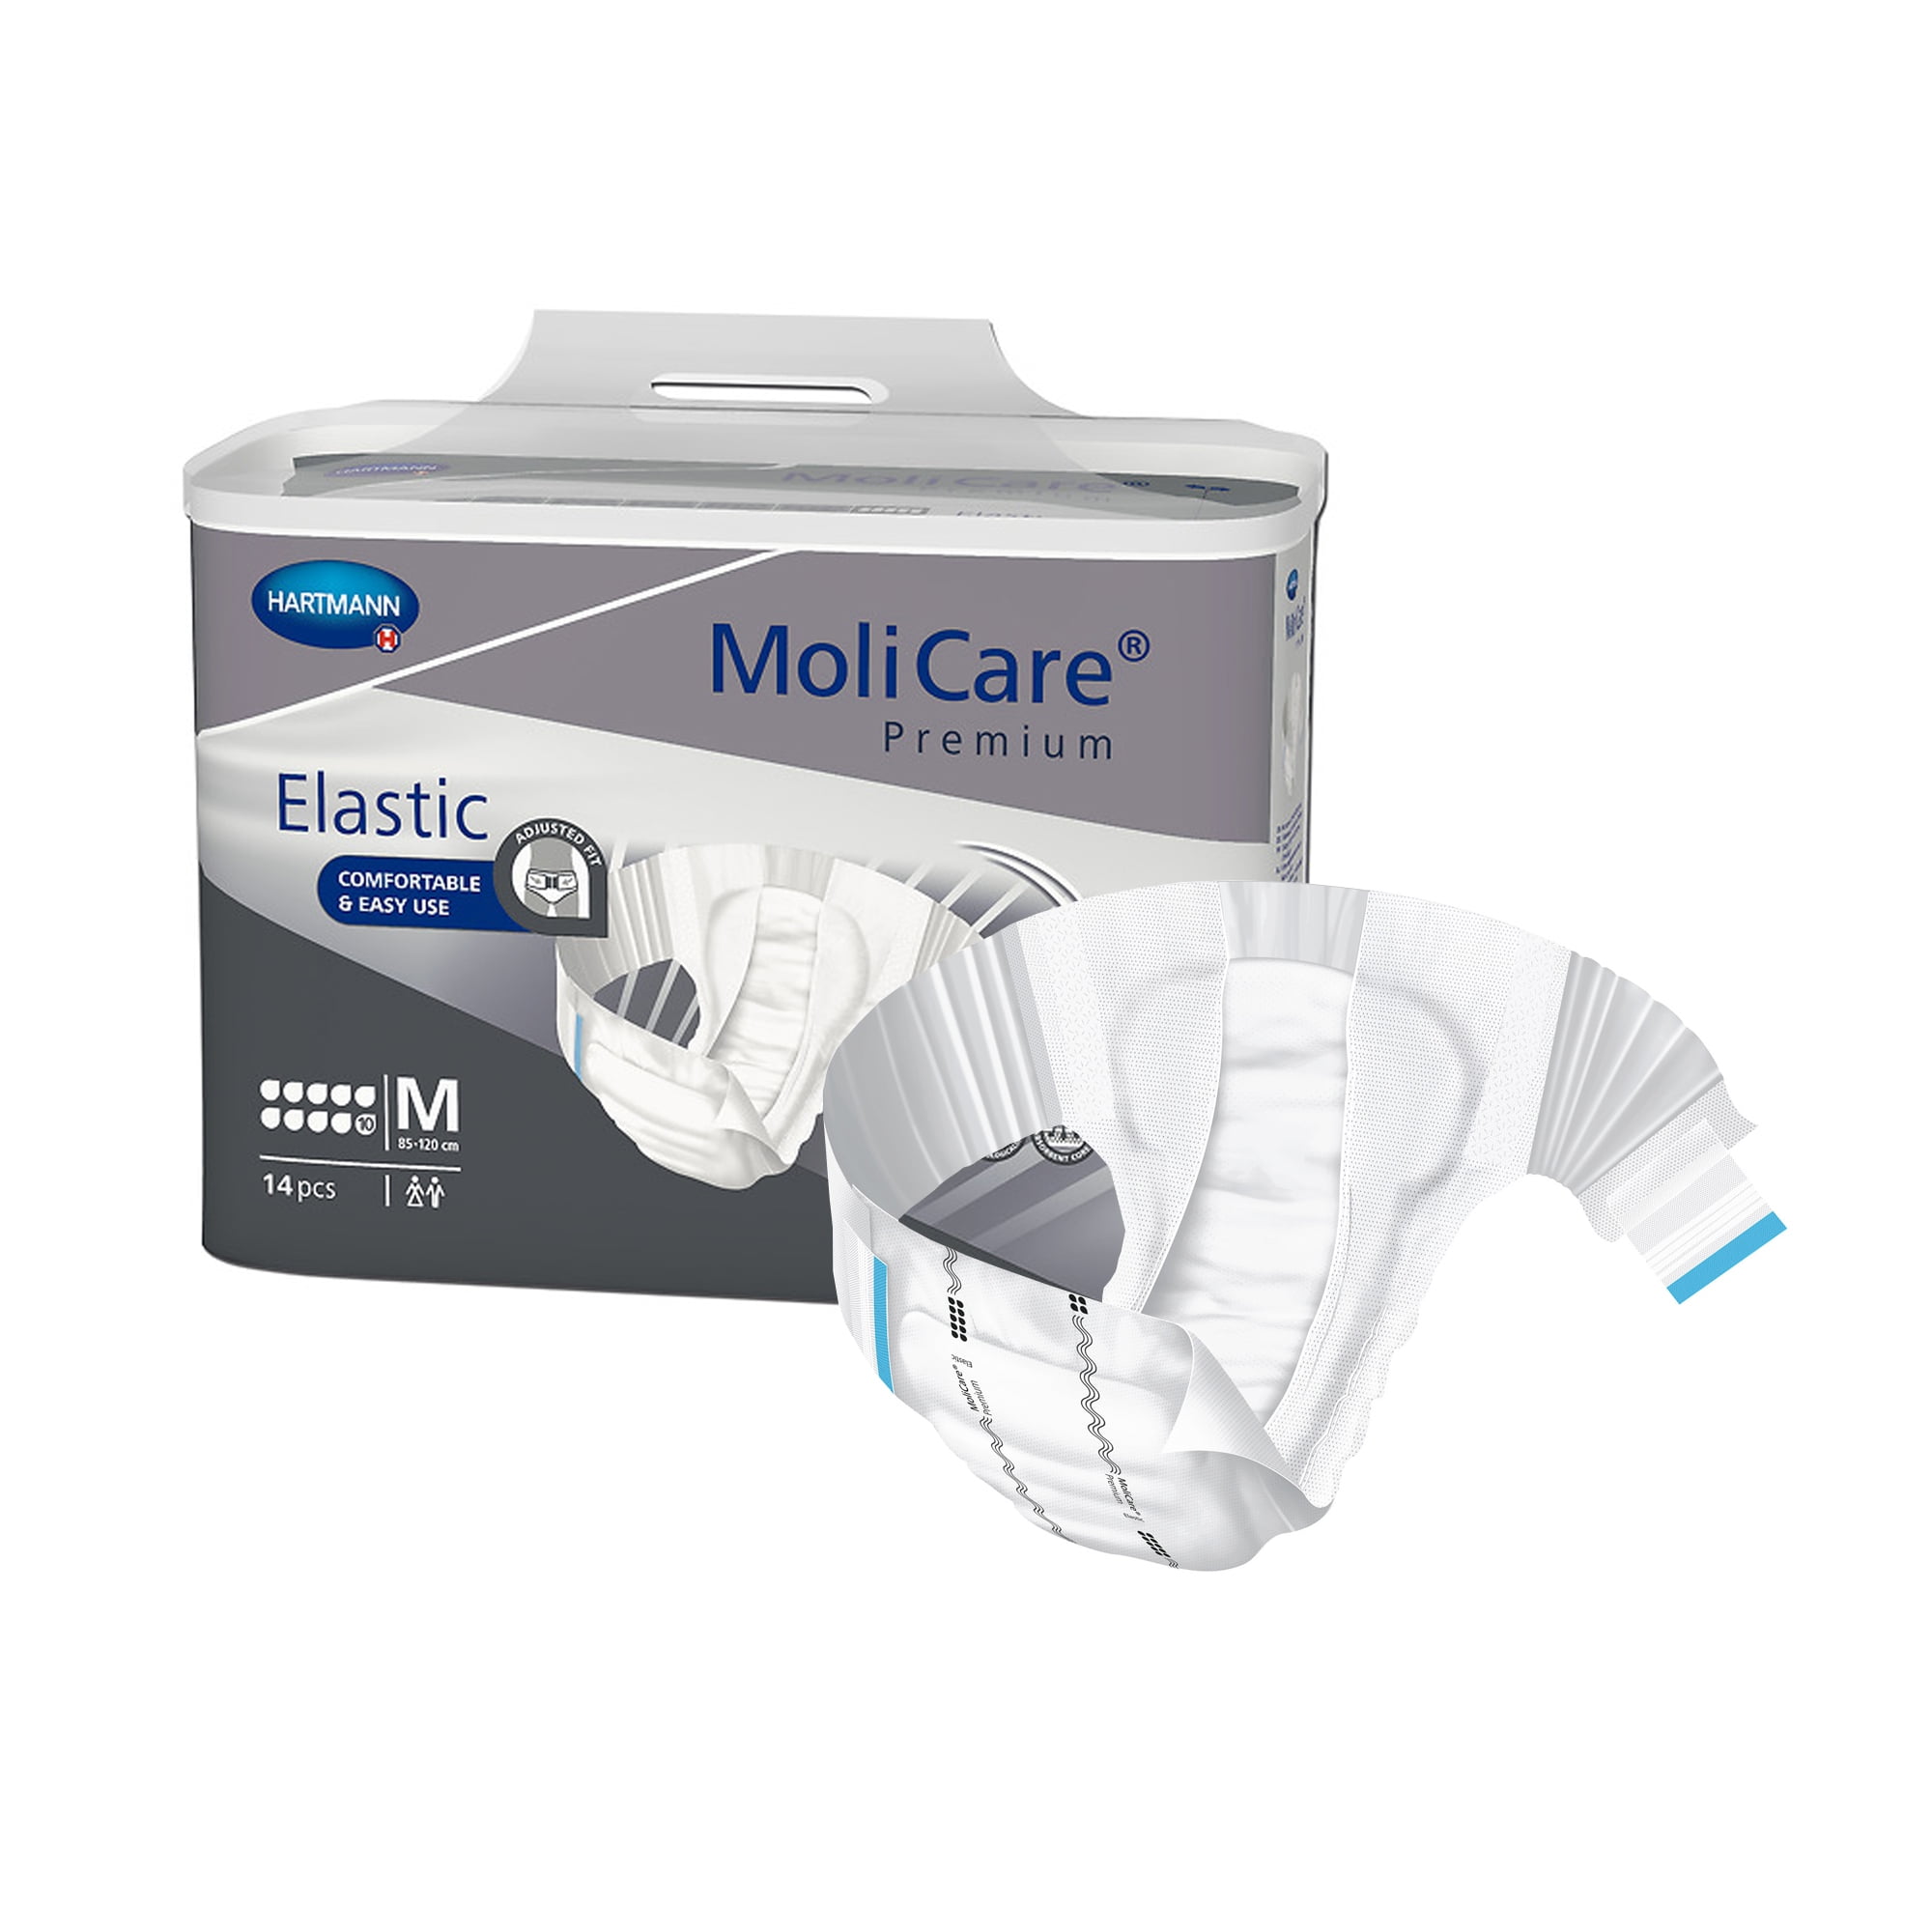 MoliCare Premium Incontinence Brief, 10D - Heavy Absorbency Adult Diaper  with Refastenable Tabs - Unisex, Size Medium, 14 Count, 1 Pack